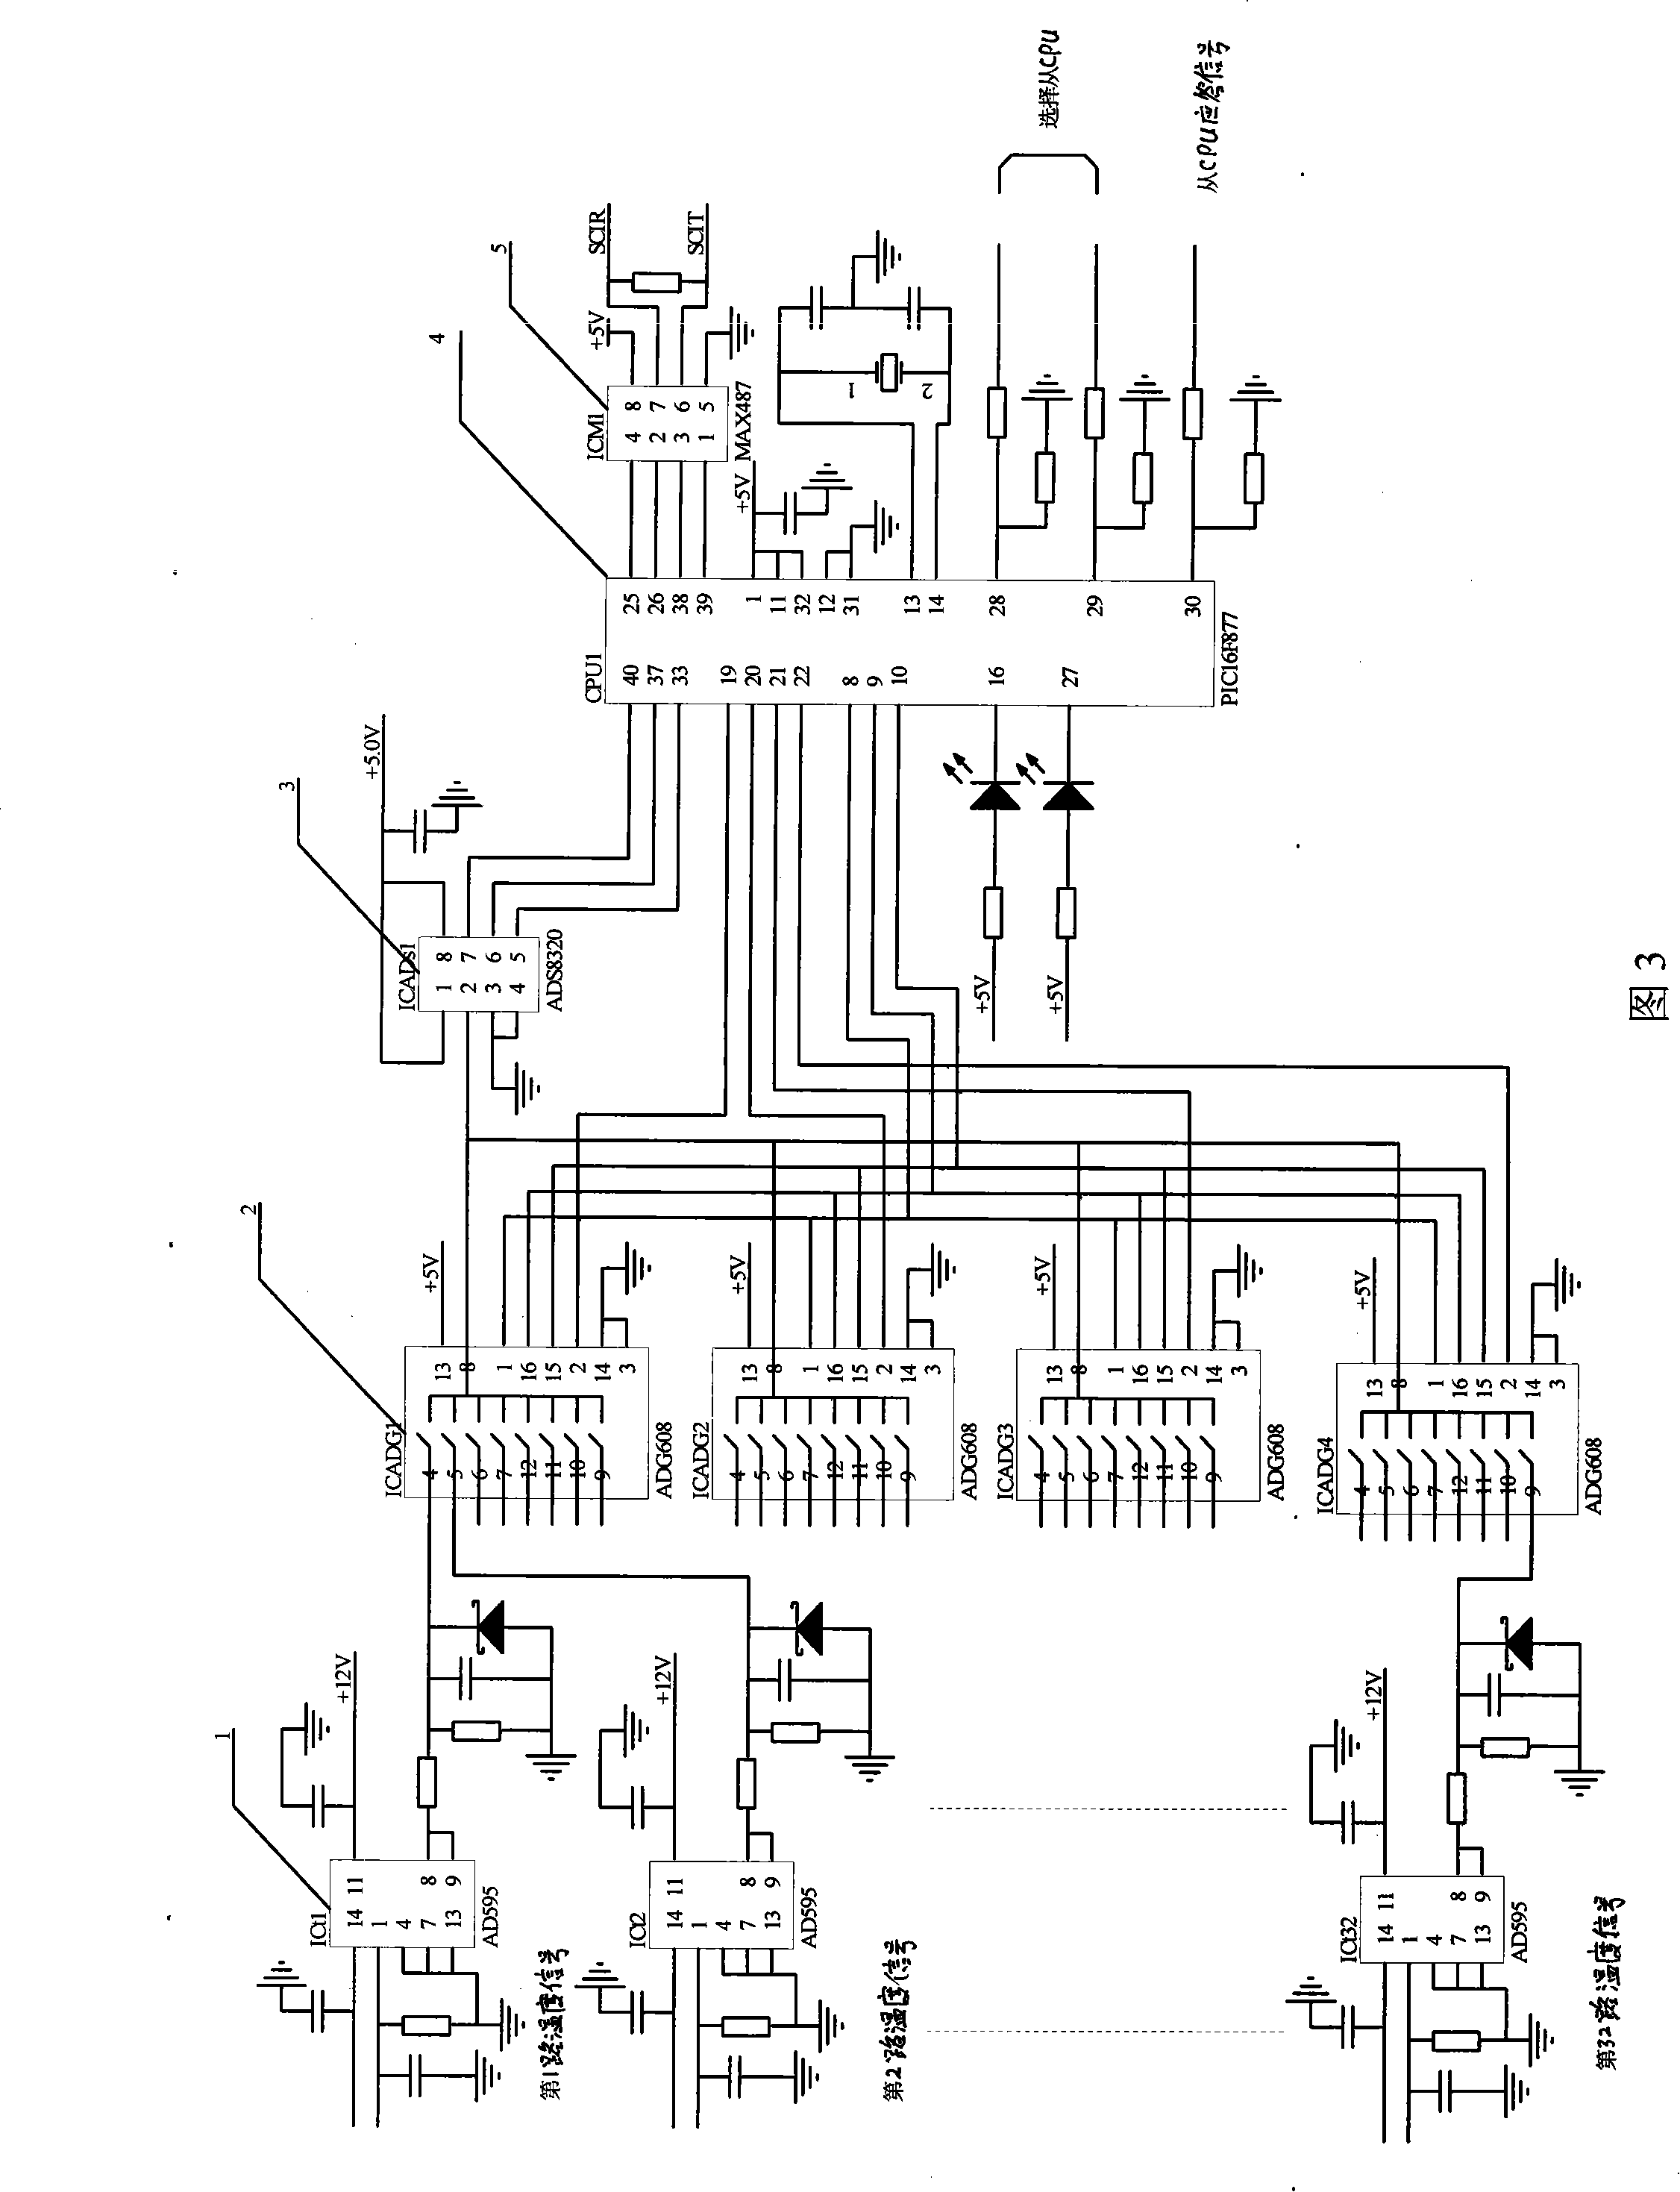 System for detecting temperature of dynamic battery set for hybrid power car